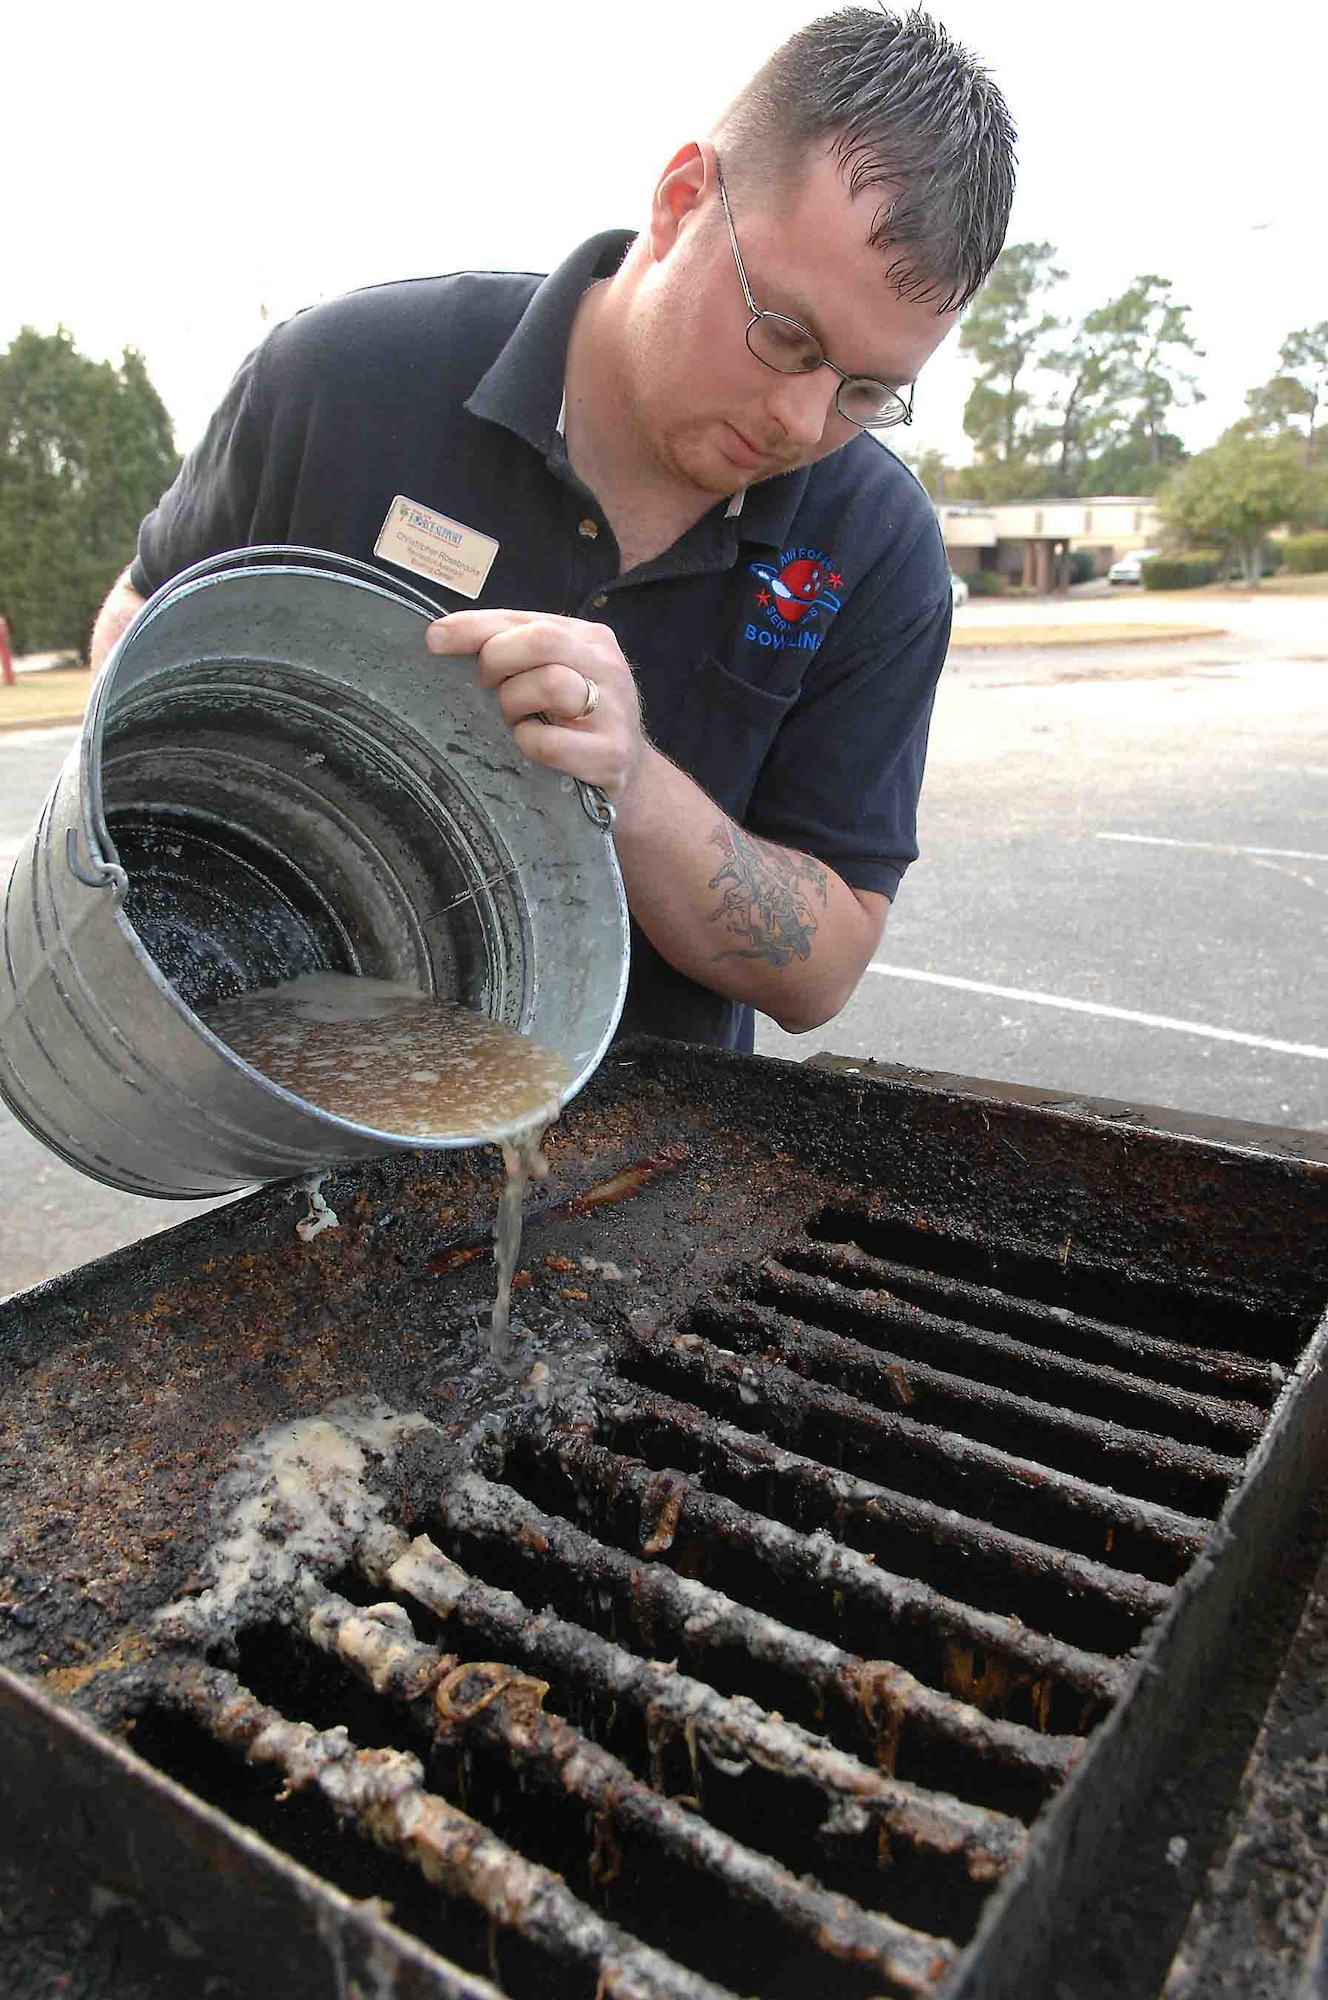 SHAW AIR FORCE BASE, S.C. -- Chris Rosebrooks, Shaw bowling alley recreation assistant, pours grease into the vat for proper disposal. Shaw members are encouraged to dispose of their used cooking oil in the vat located at the Shaw Bowling Center. (U.S. Air Force photo/Staff Sgt. Josef Cole)